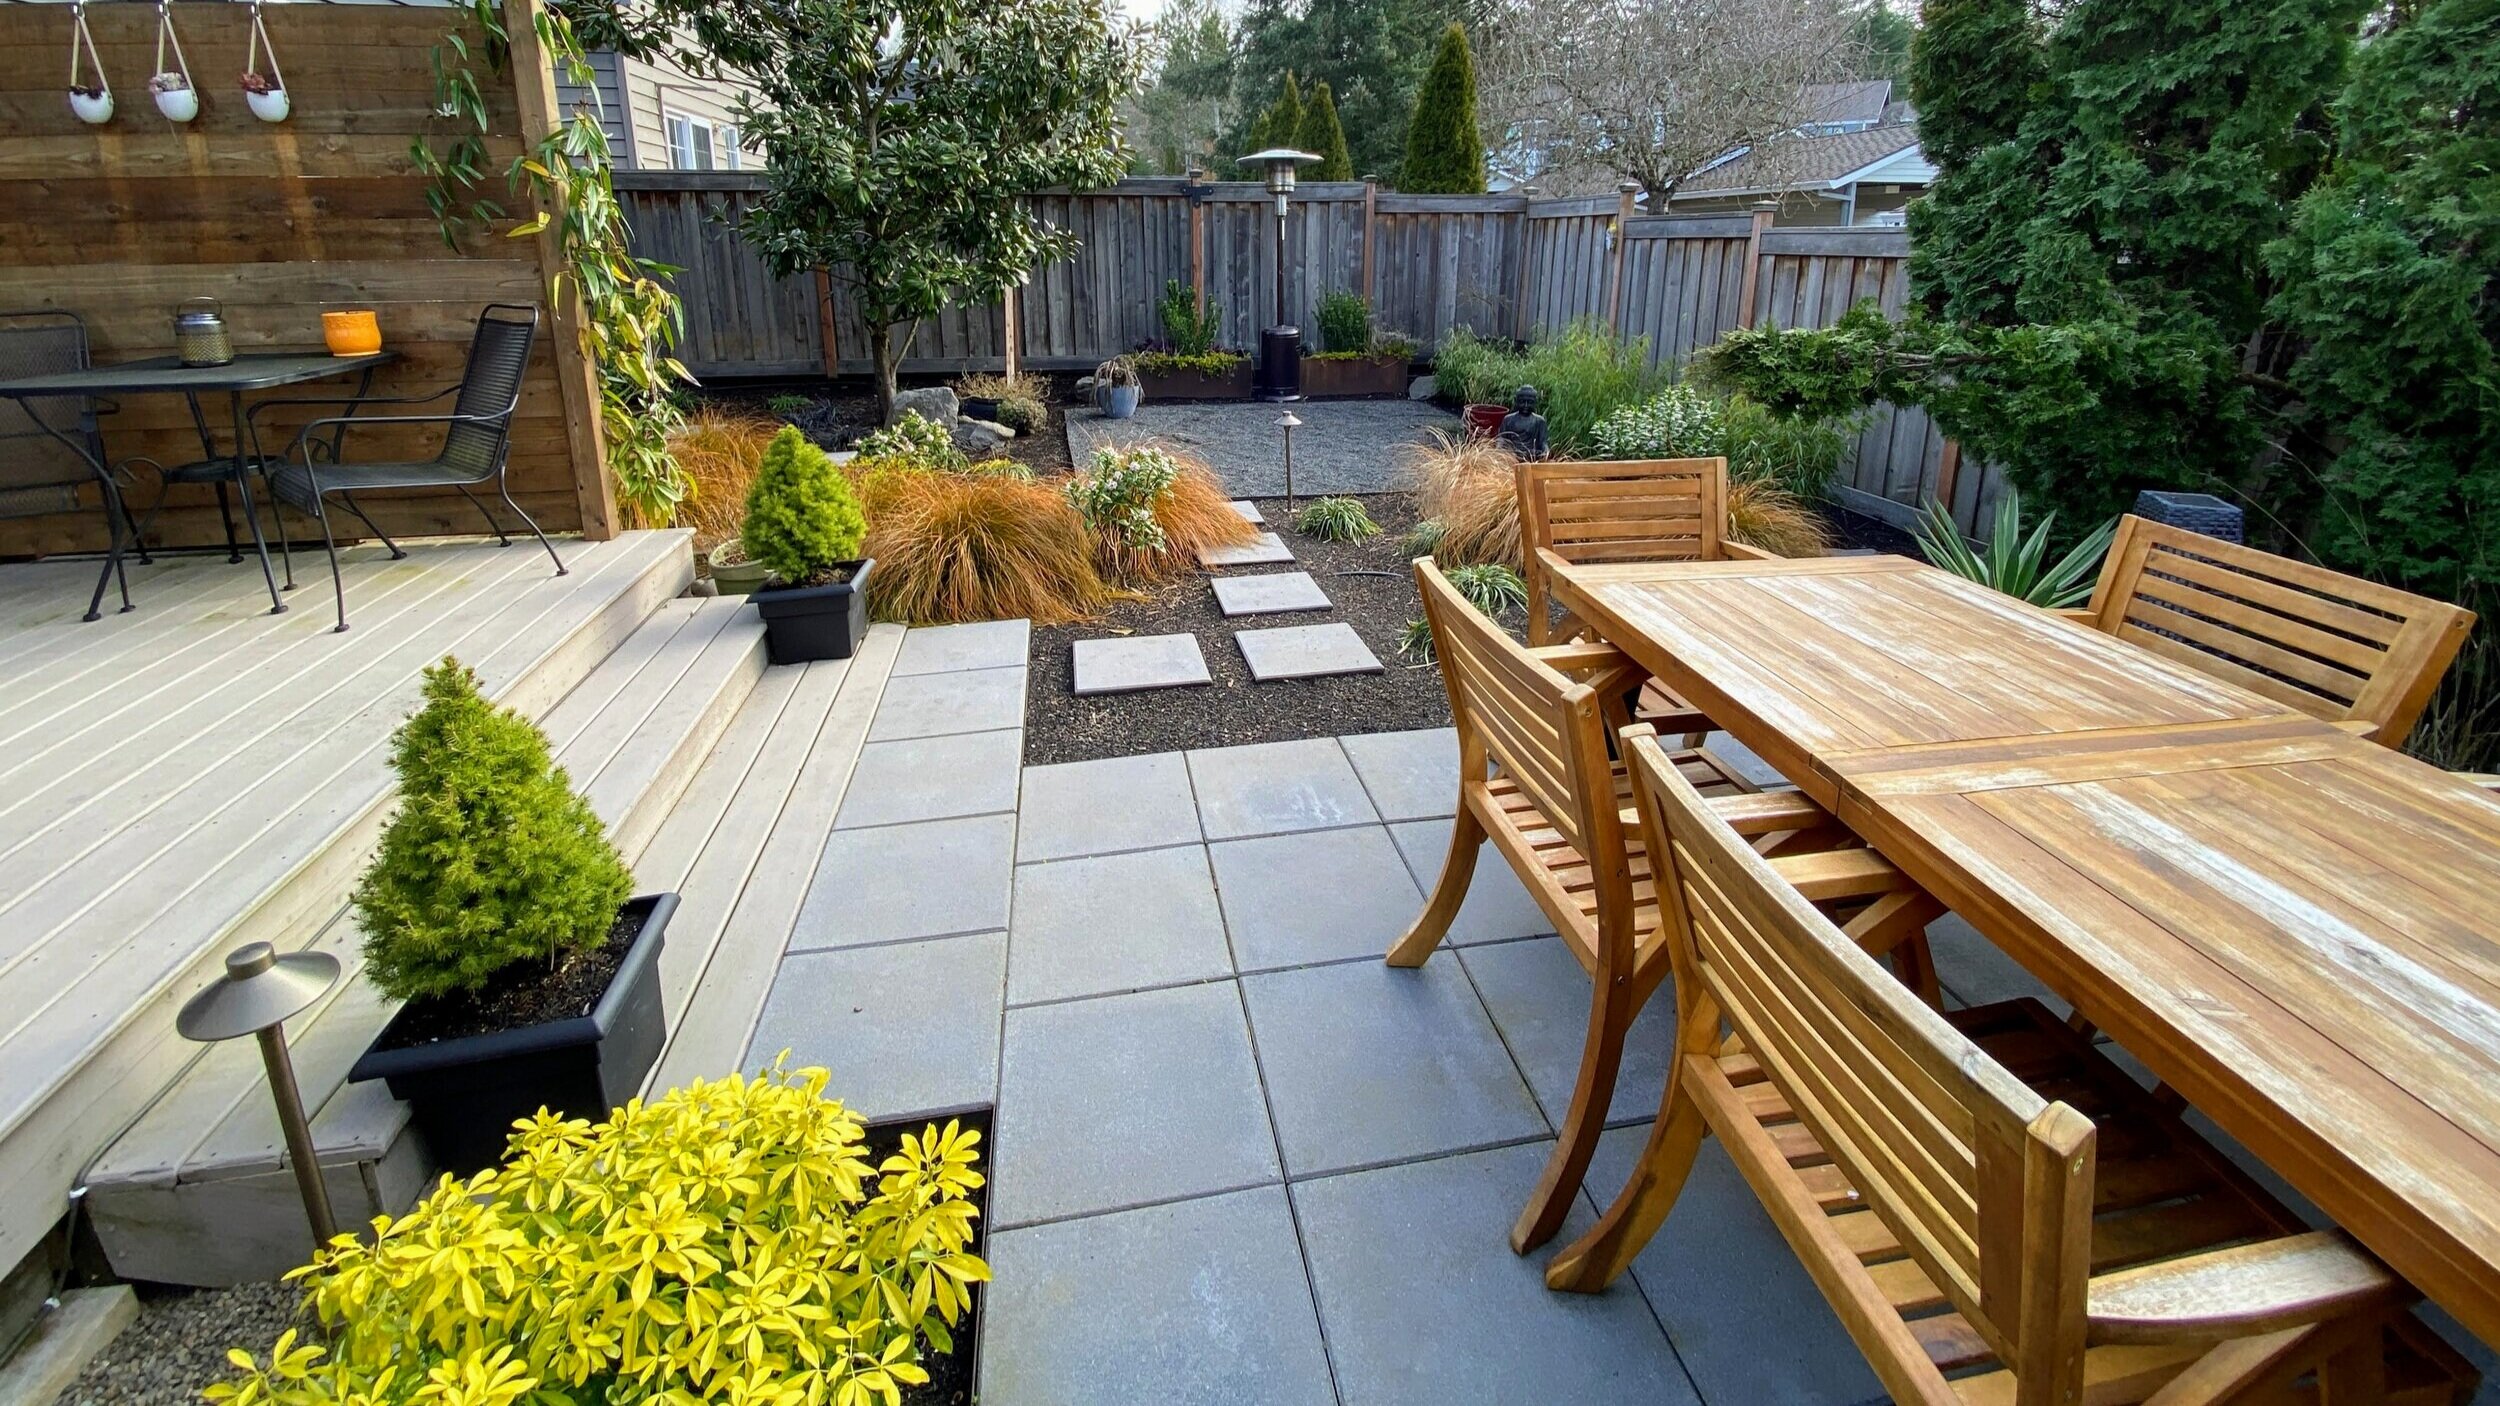 What does a patio add to the home''s value?
